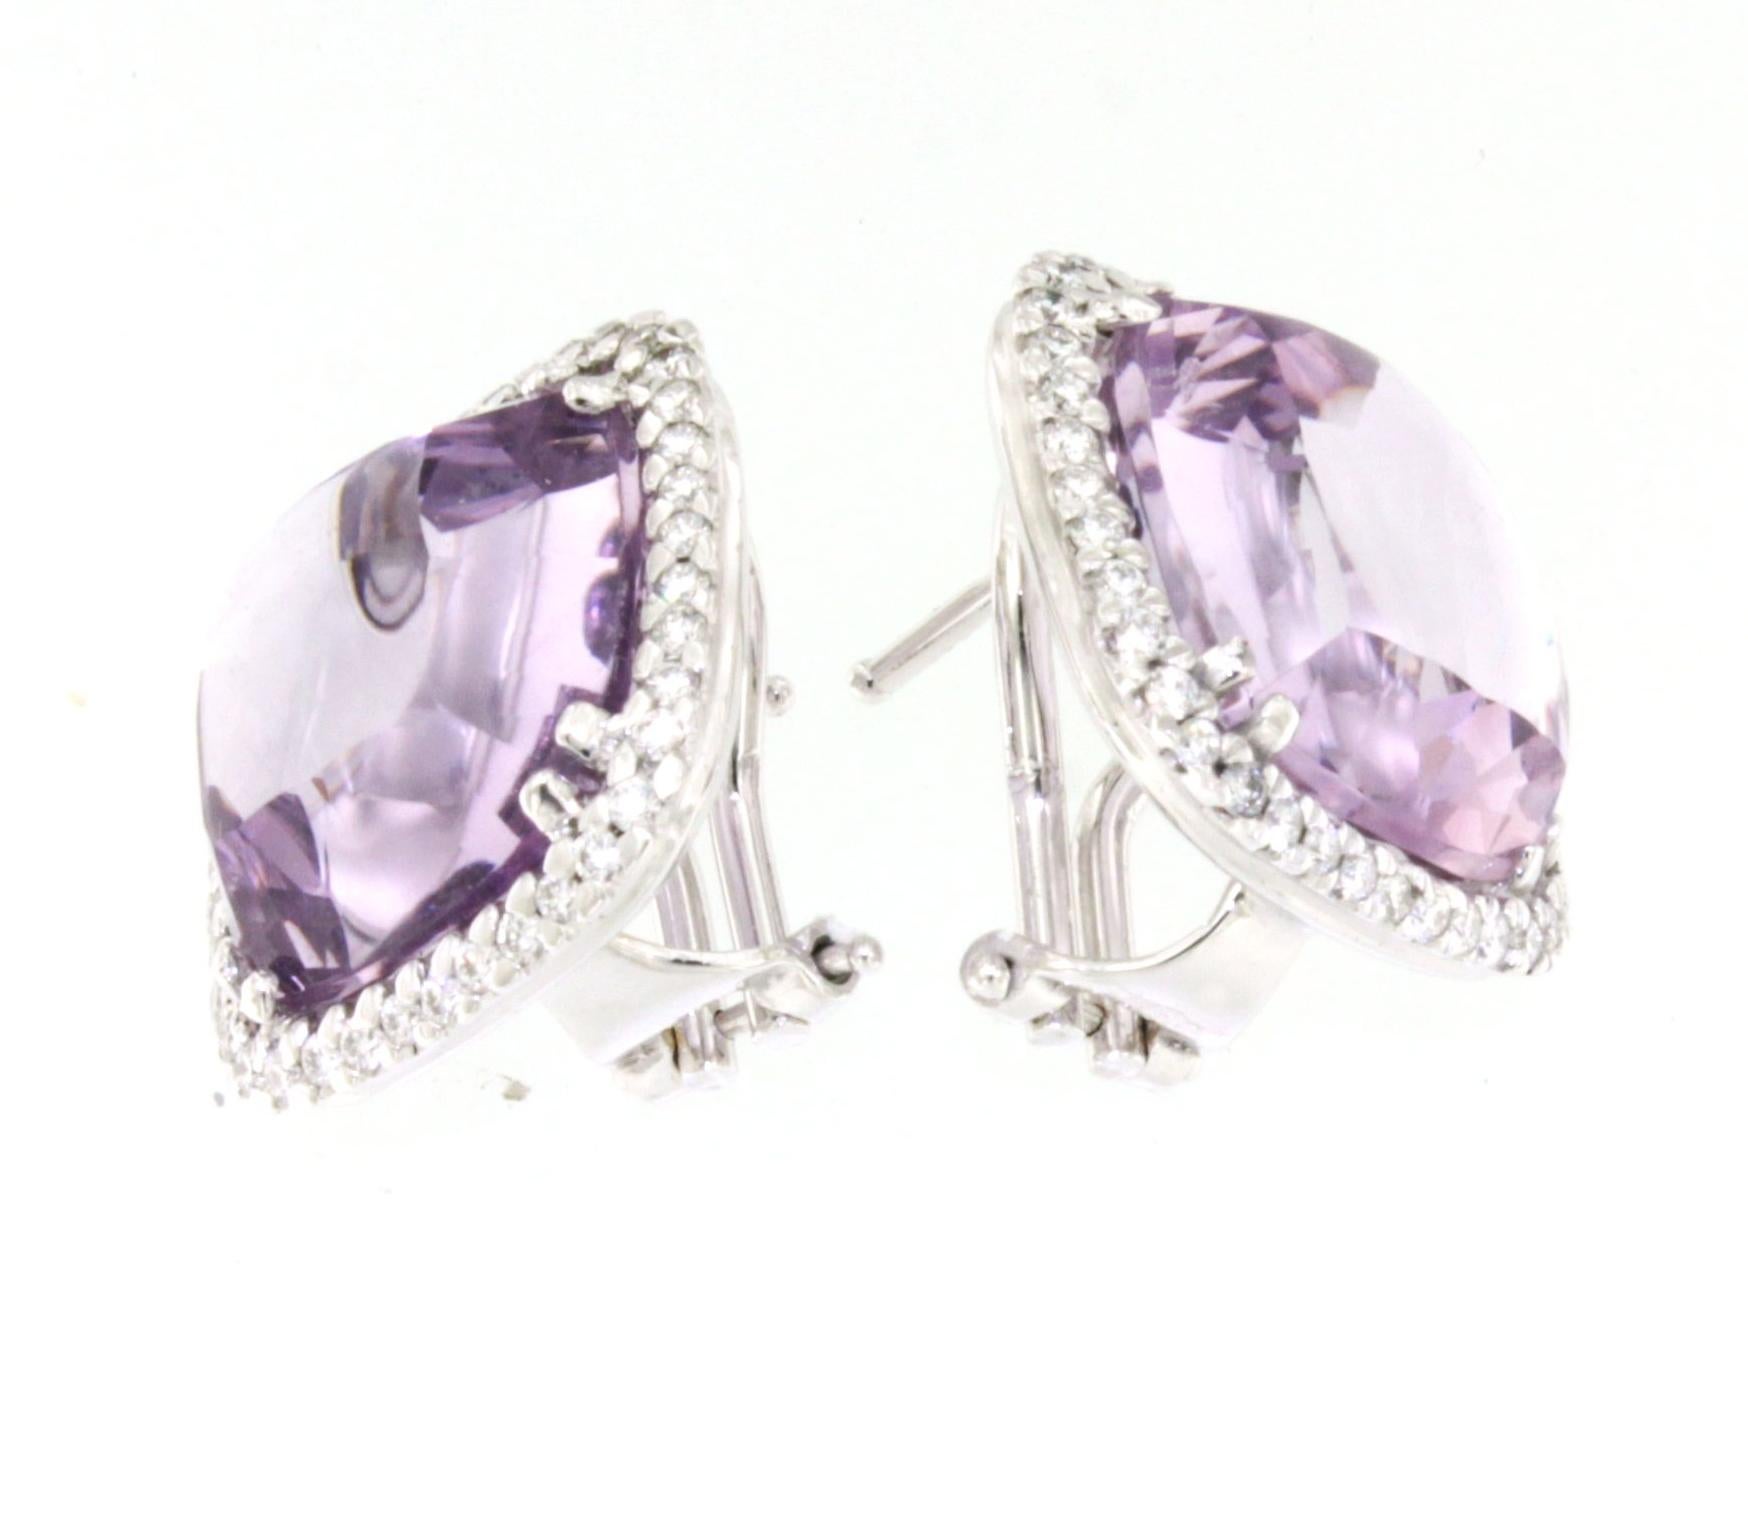 Special timeless earring with light amethyst .The designer Gisella has a refined taste, her jewels stand out from others. Designed and handmade in Italy by Stanoppi Jewellery since 1948.
Diamonds cts 0.76

All Stanoppi Jewelry is new and has never